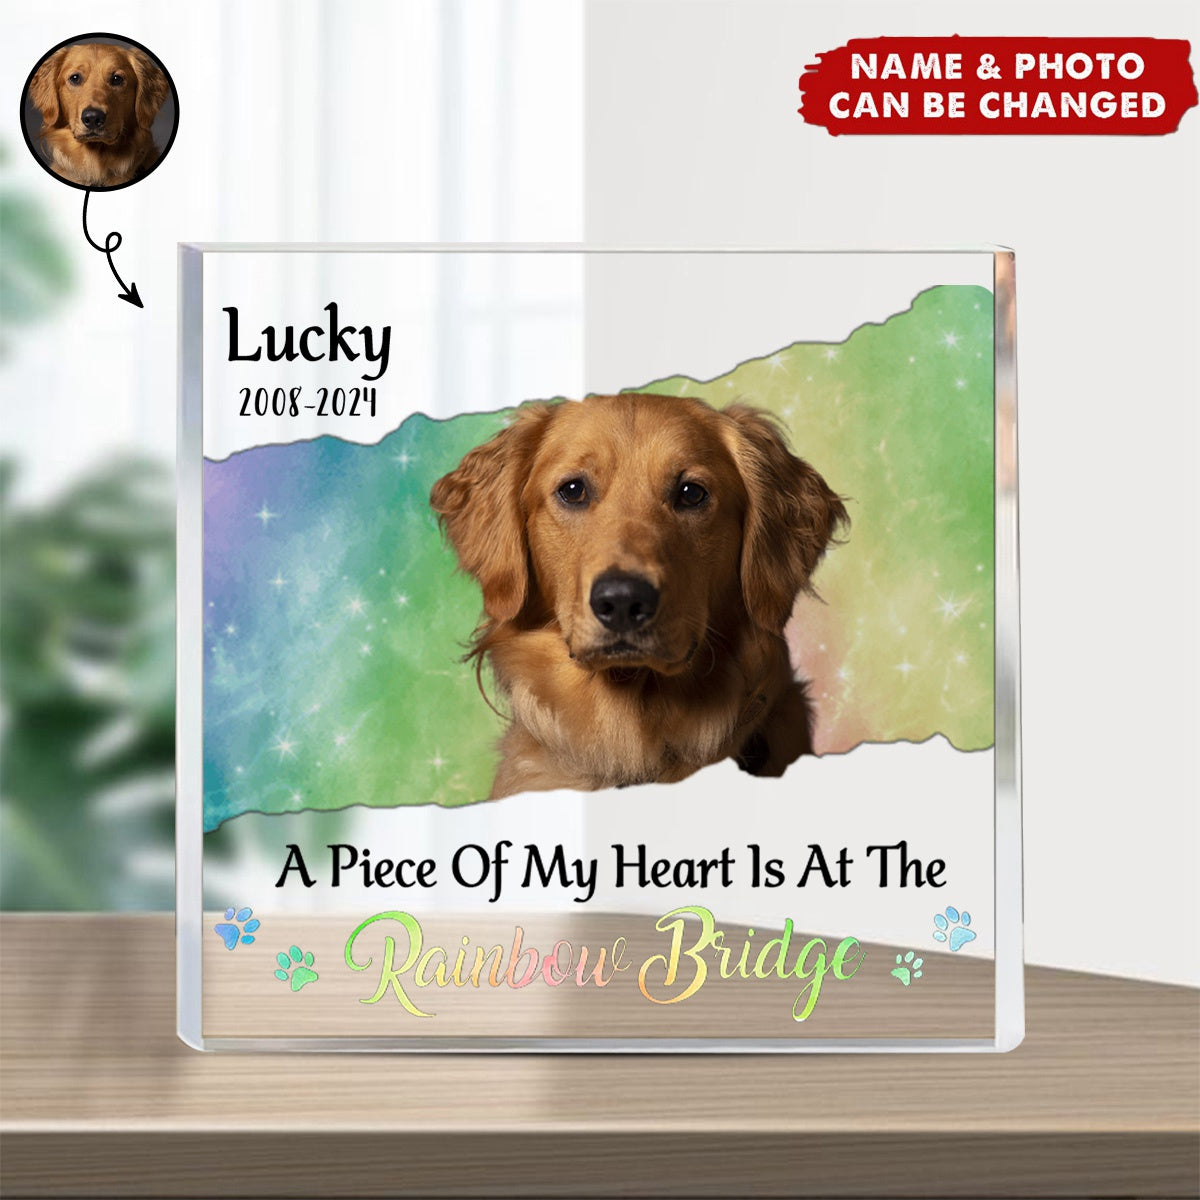 I Crossed The Rainbow Bridge Knowing I Was Loved - Personalized Square Shaped Acrylic Plaque - Memorial Gift For Pet Owners, Pet Lovers